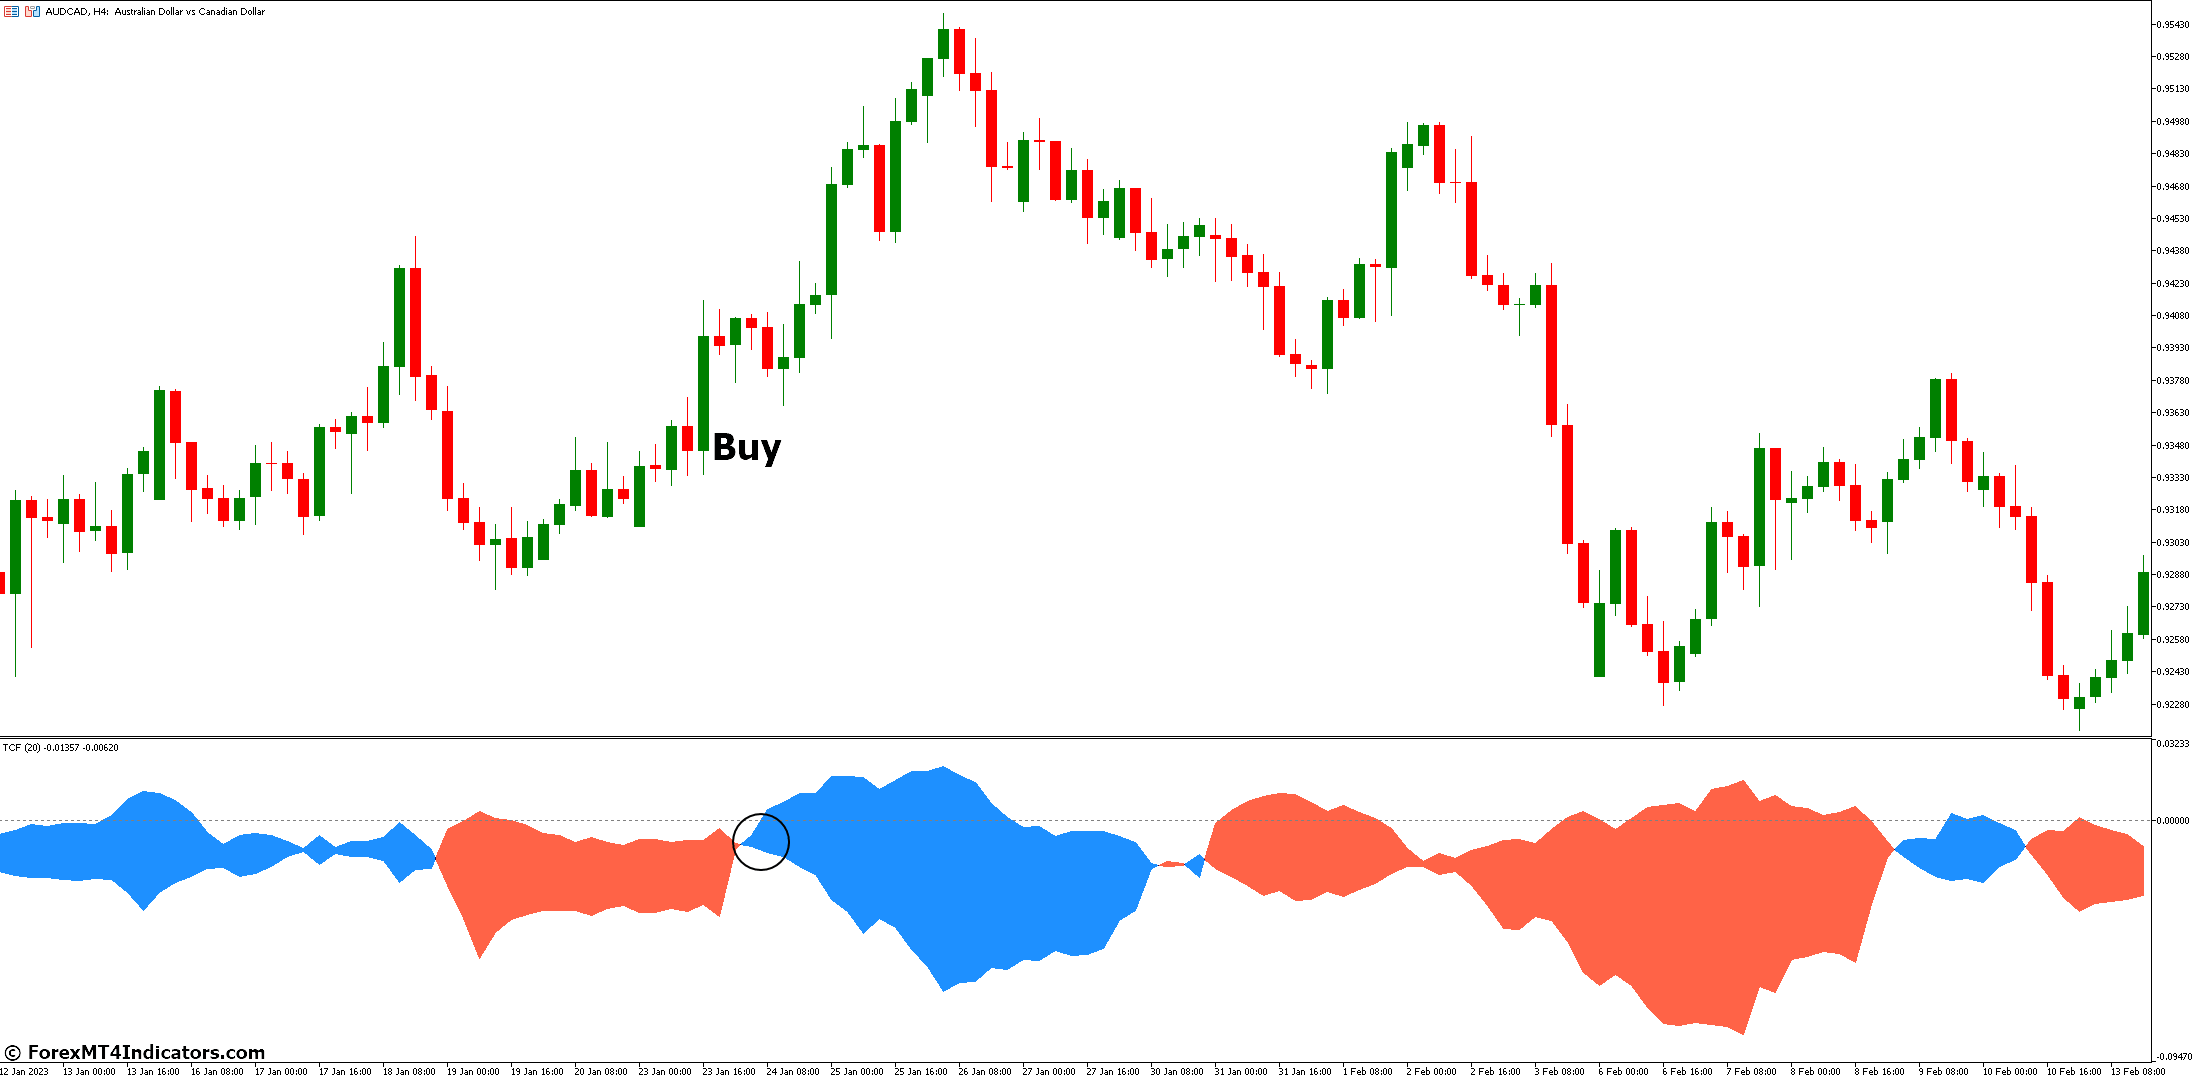 How to Trade with Trend Continuation Factor Indicator - Buy Entry